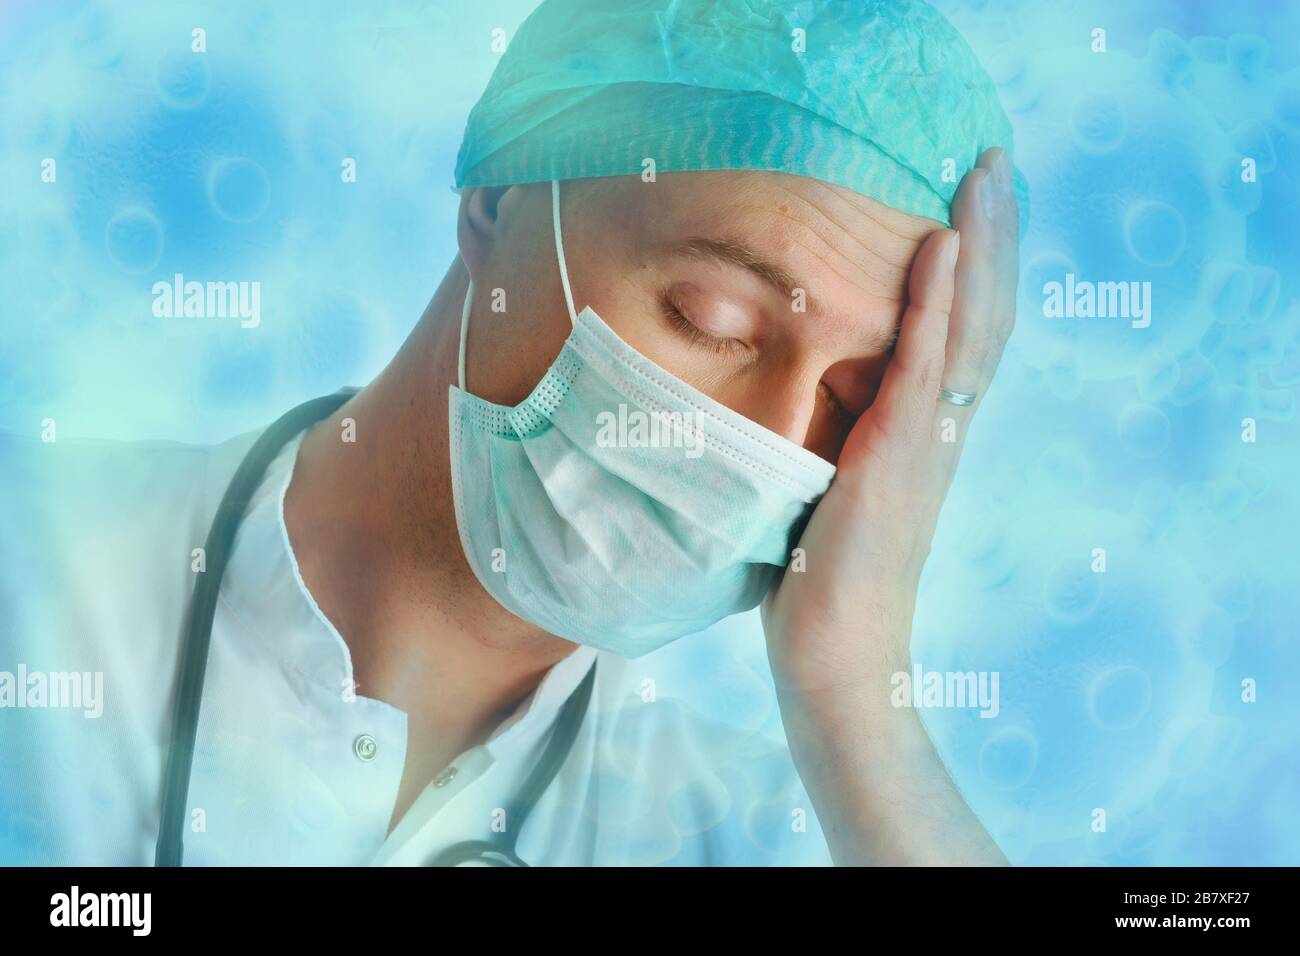 Coronavirus Ilustration, young doctor in cap and mask having an headache, COVID 19 Stock Photo